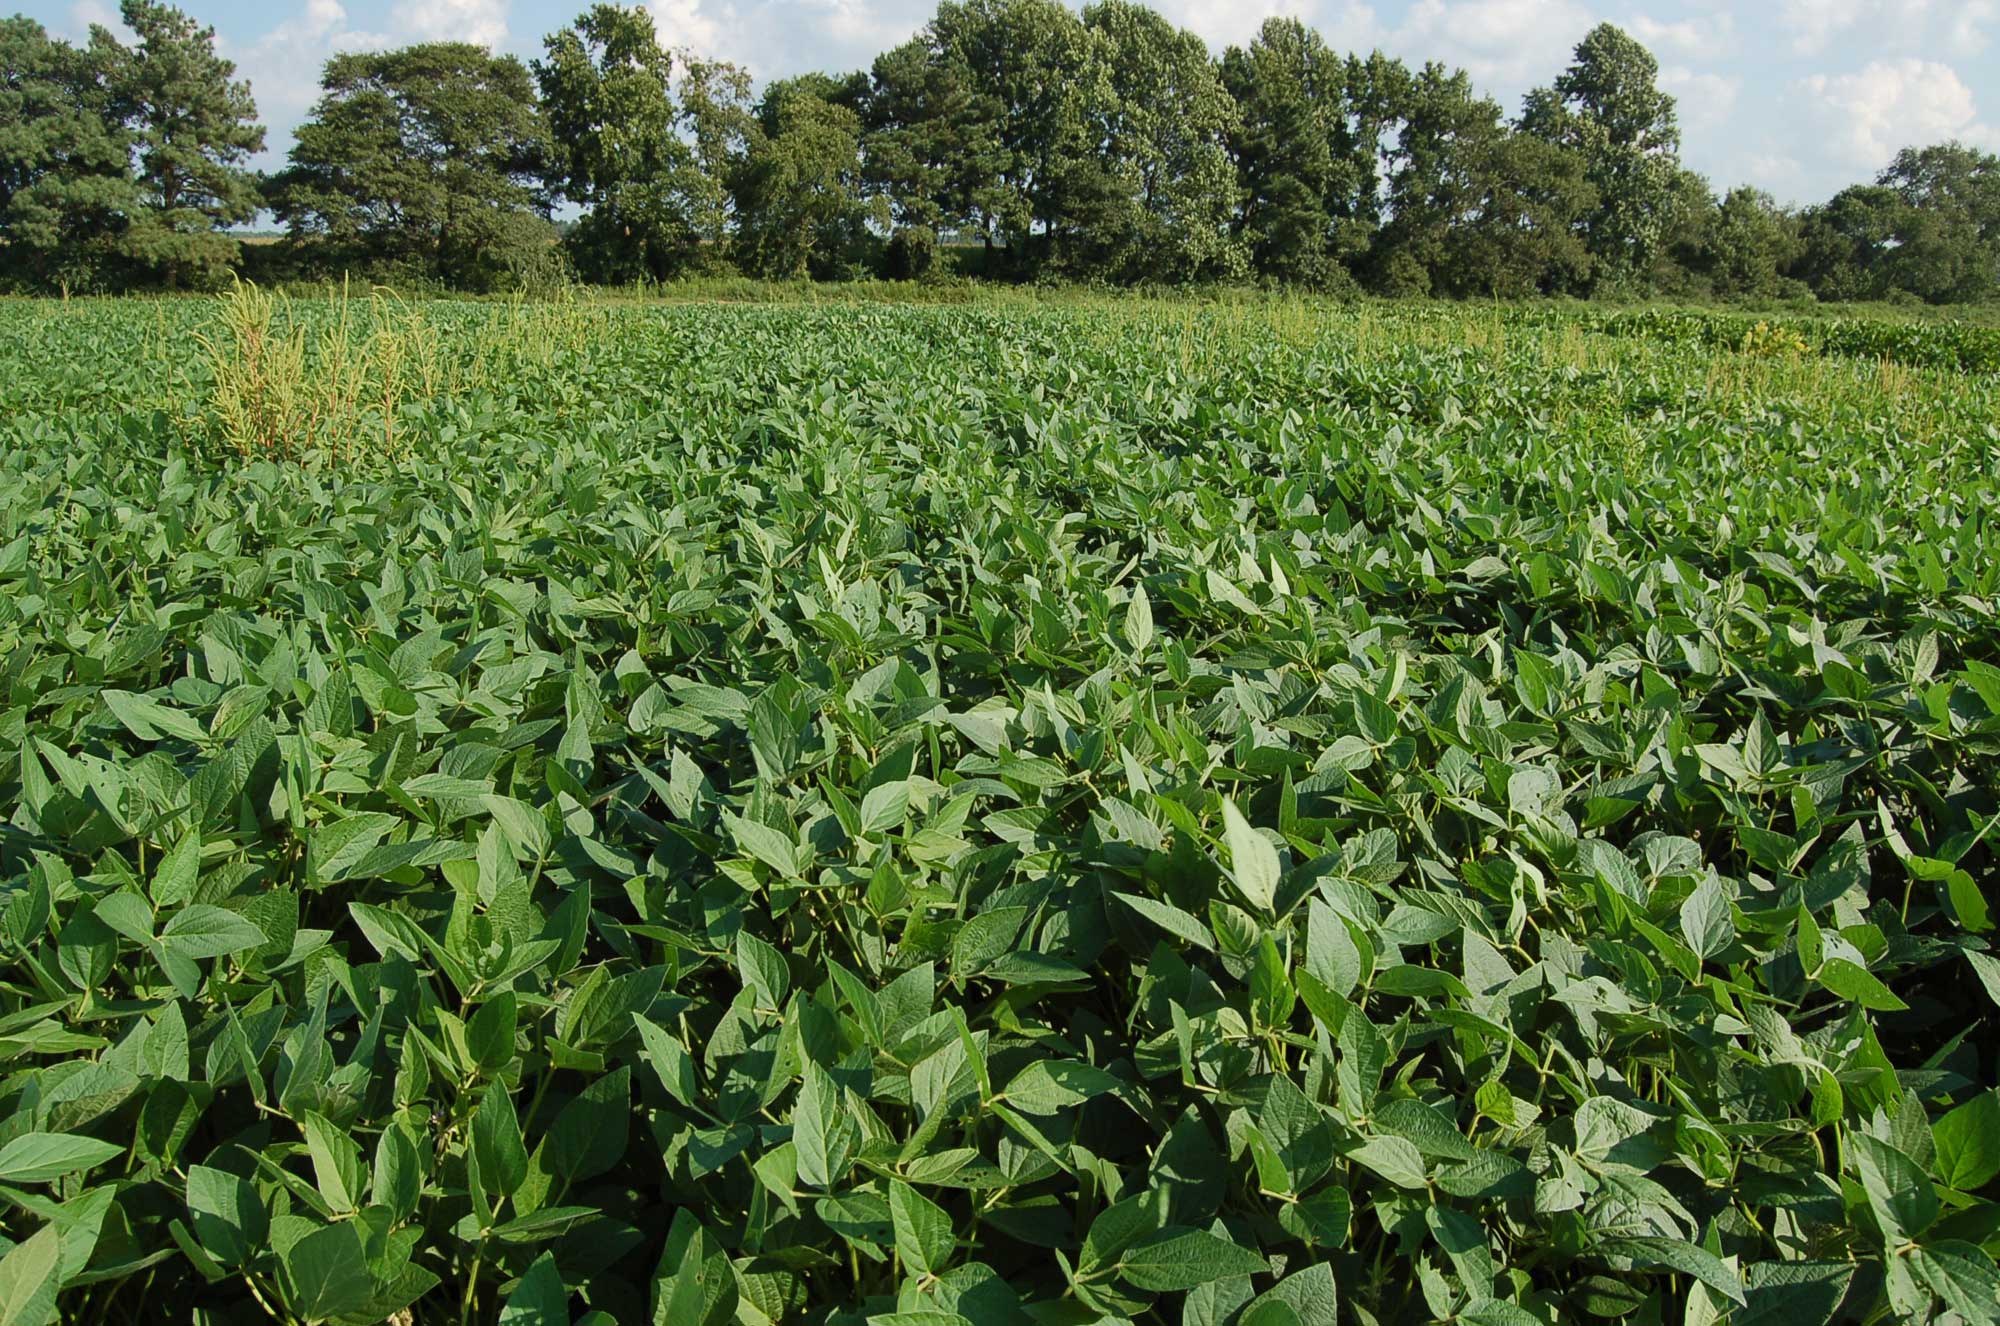 Photograph of a soybean test field infested with a small amount of Palmer amaranth in Delaware.